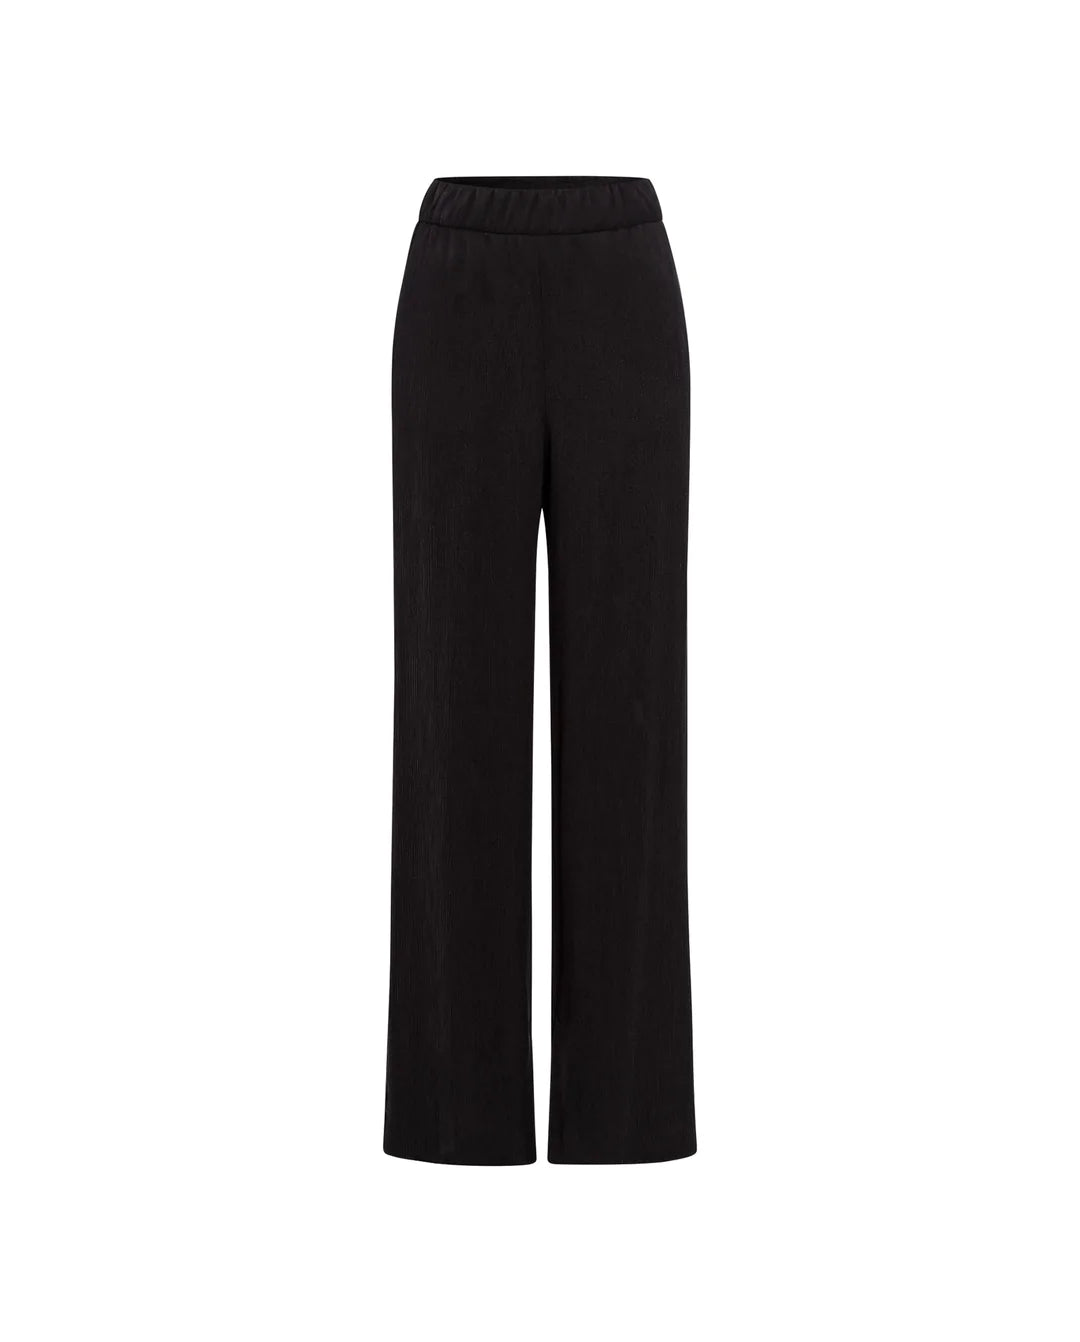 Finely pleated pants in black